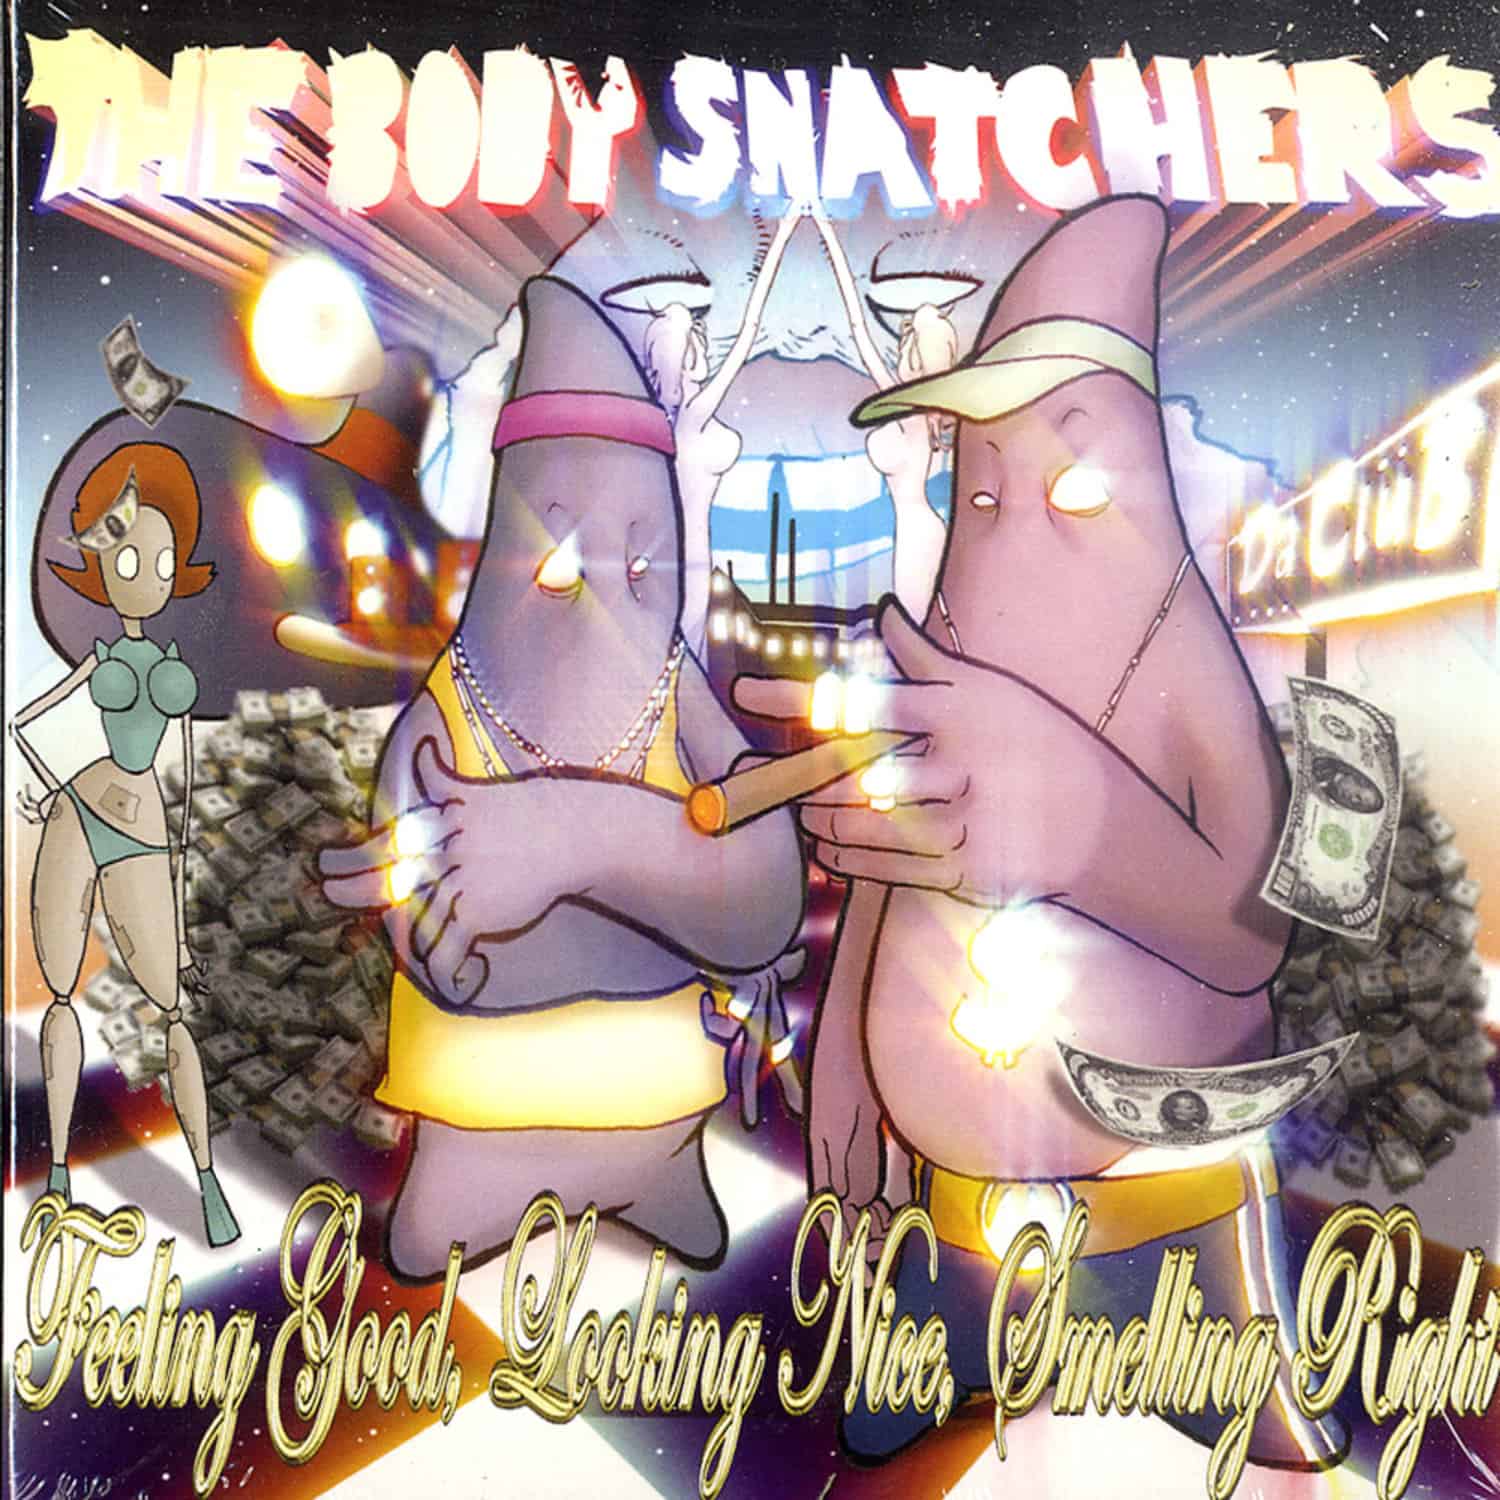 The Body Snatchers - FEELING GOOD, LOOKING NICE 